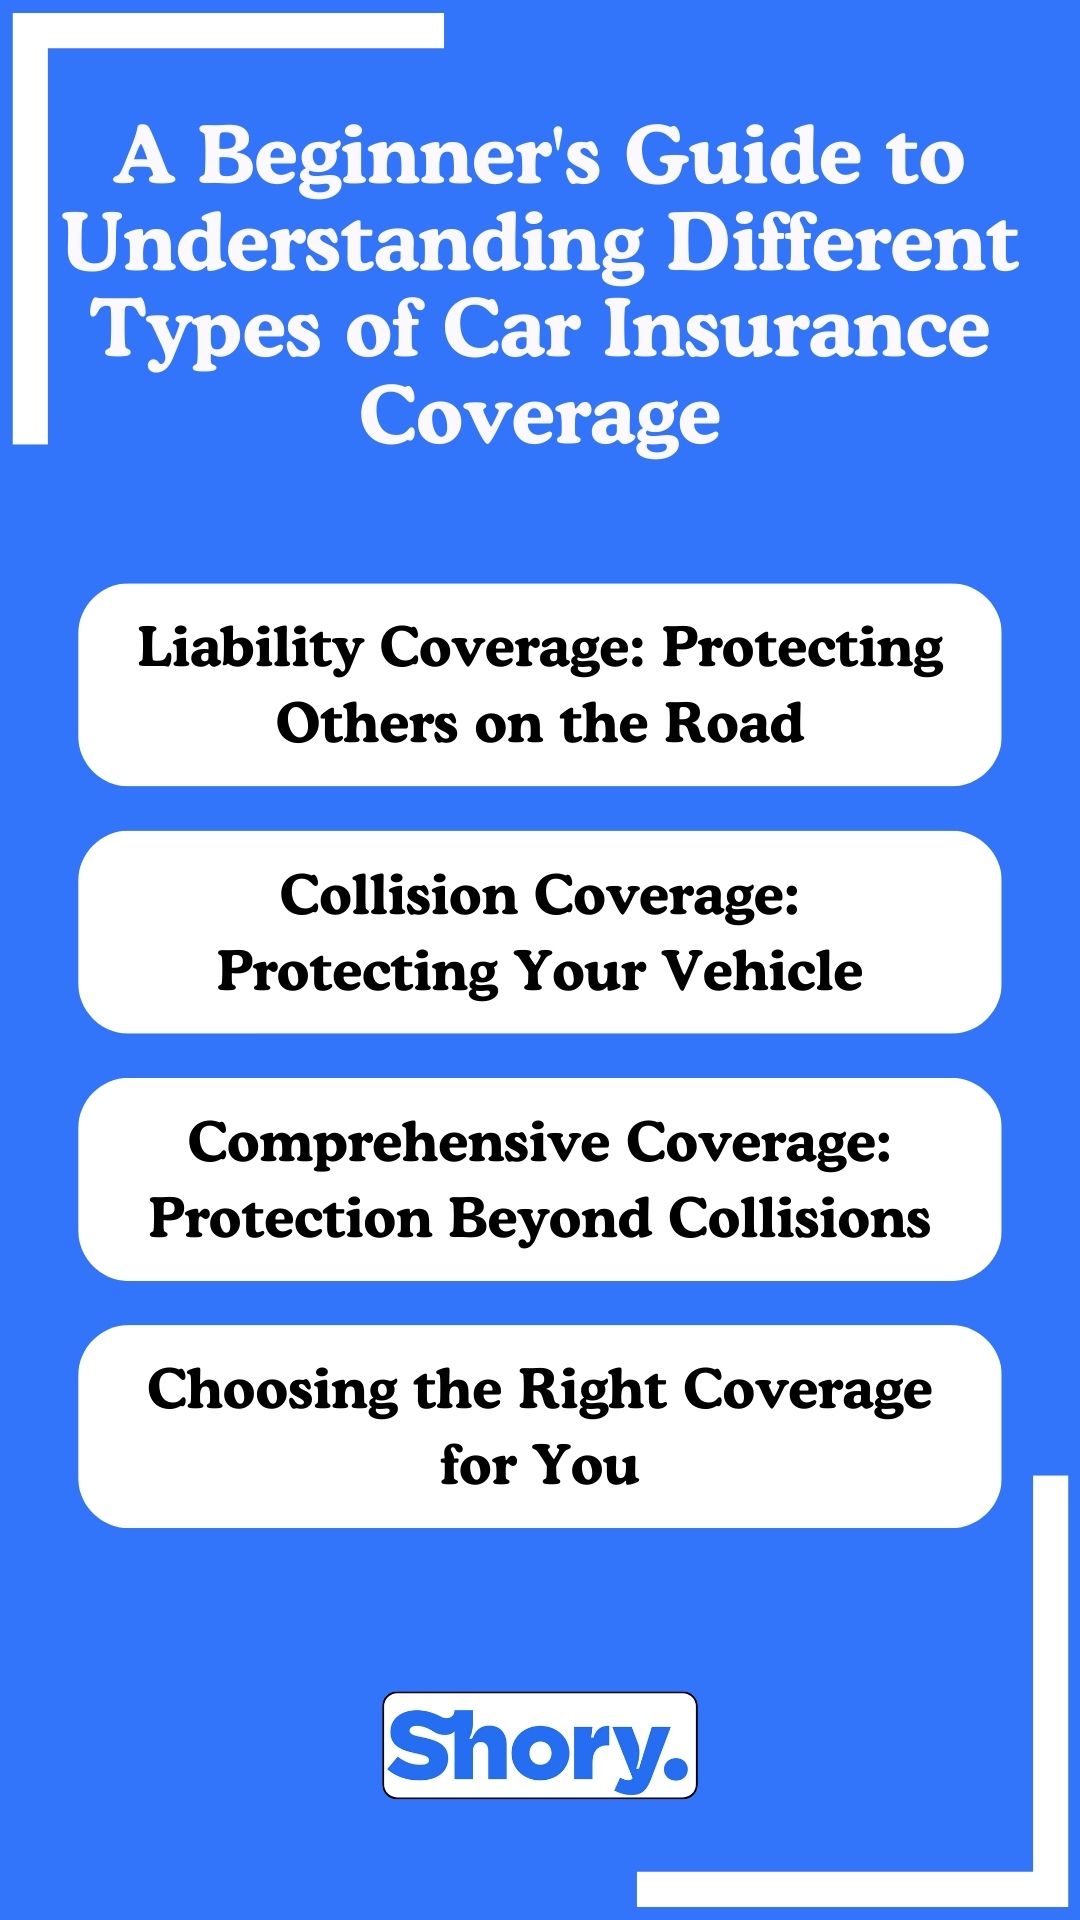 A Beginner's Guide to Understanding Different Types of Car Insurance Coverage